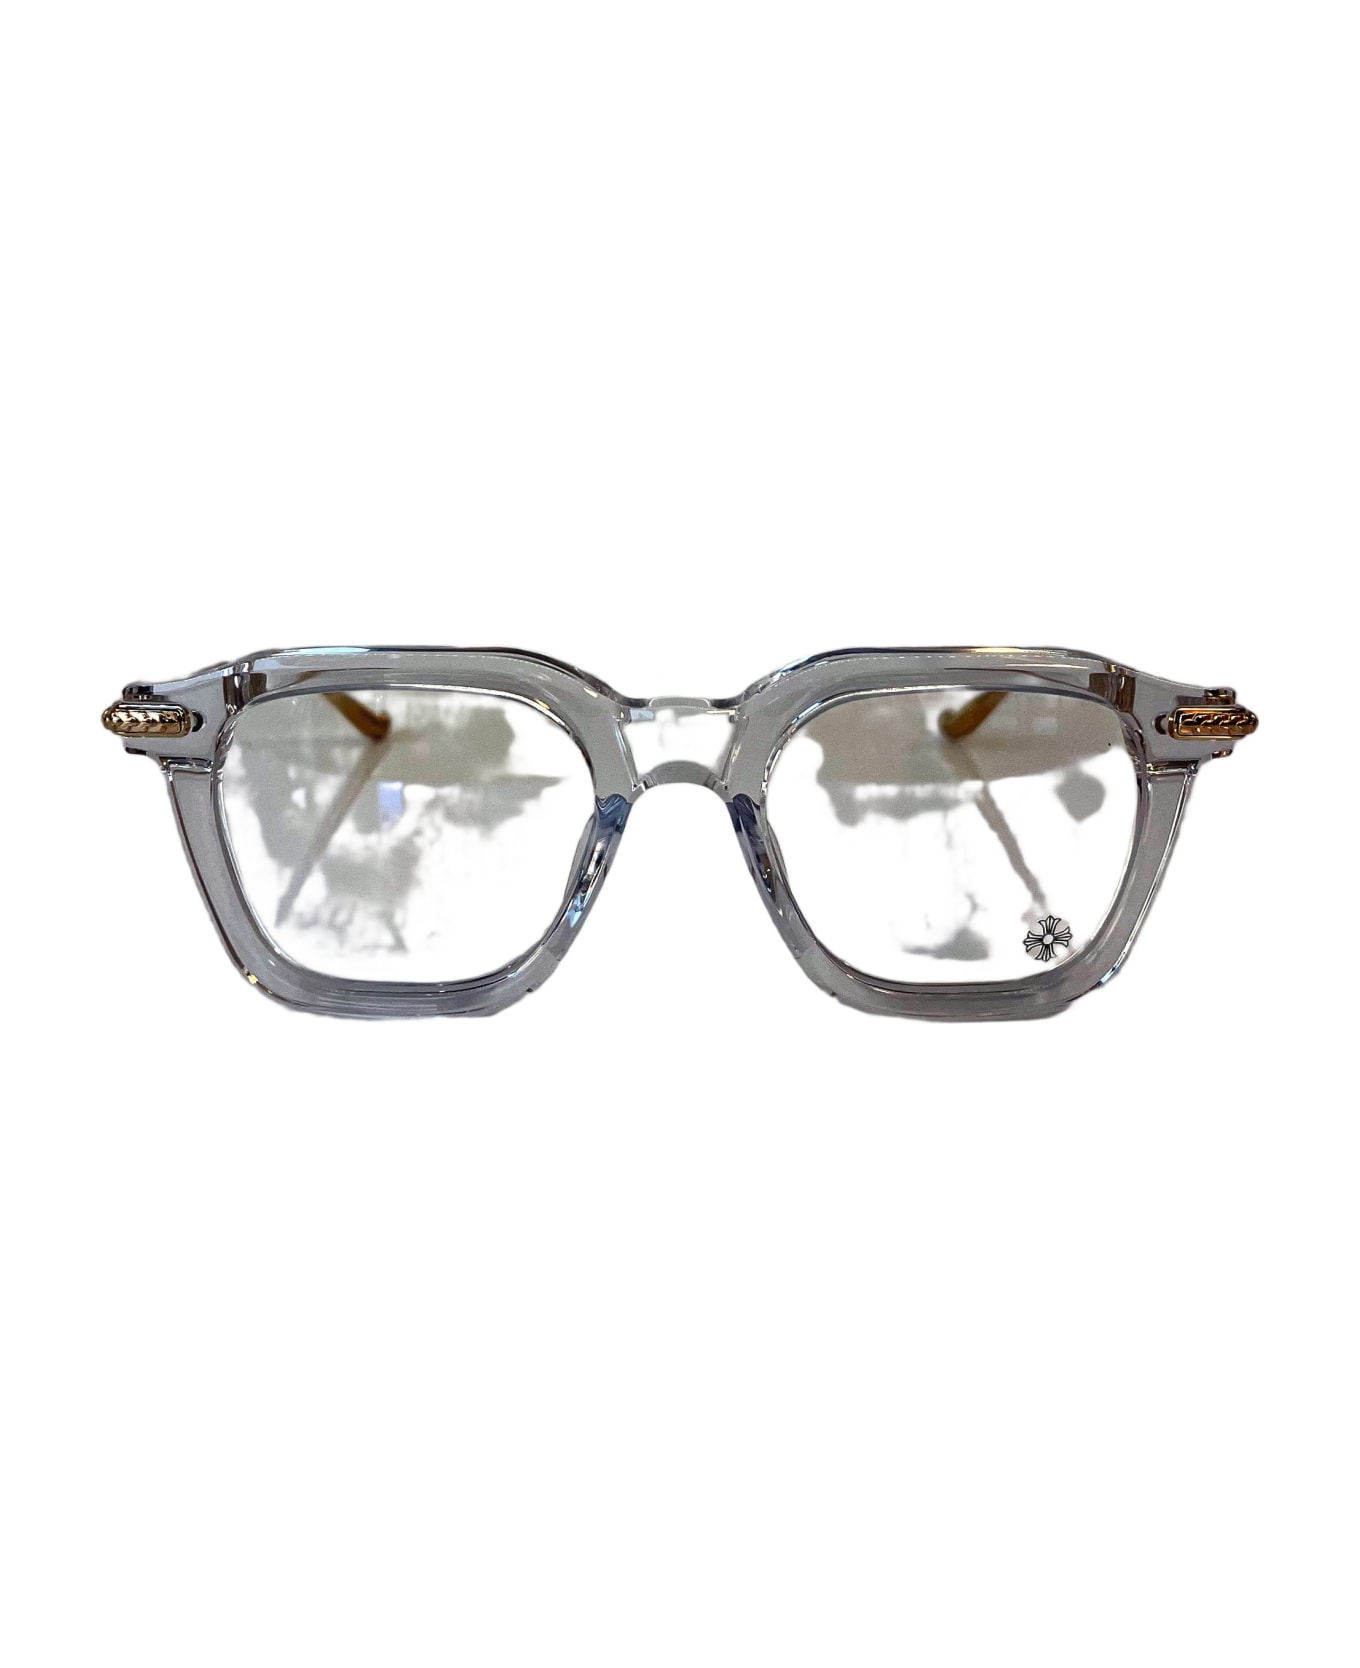 Chrome Hearts Cumption - Crystal Rx Glasses